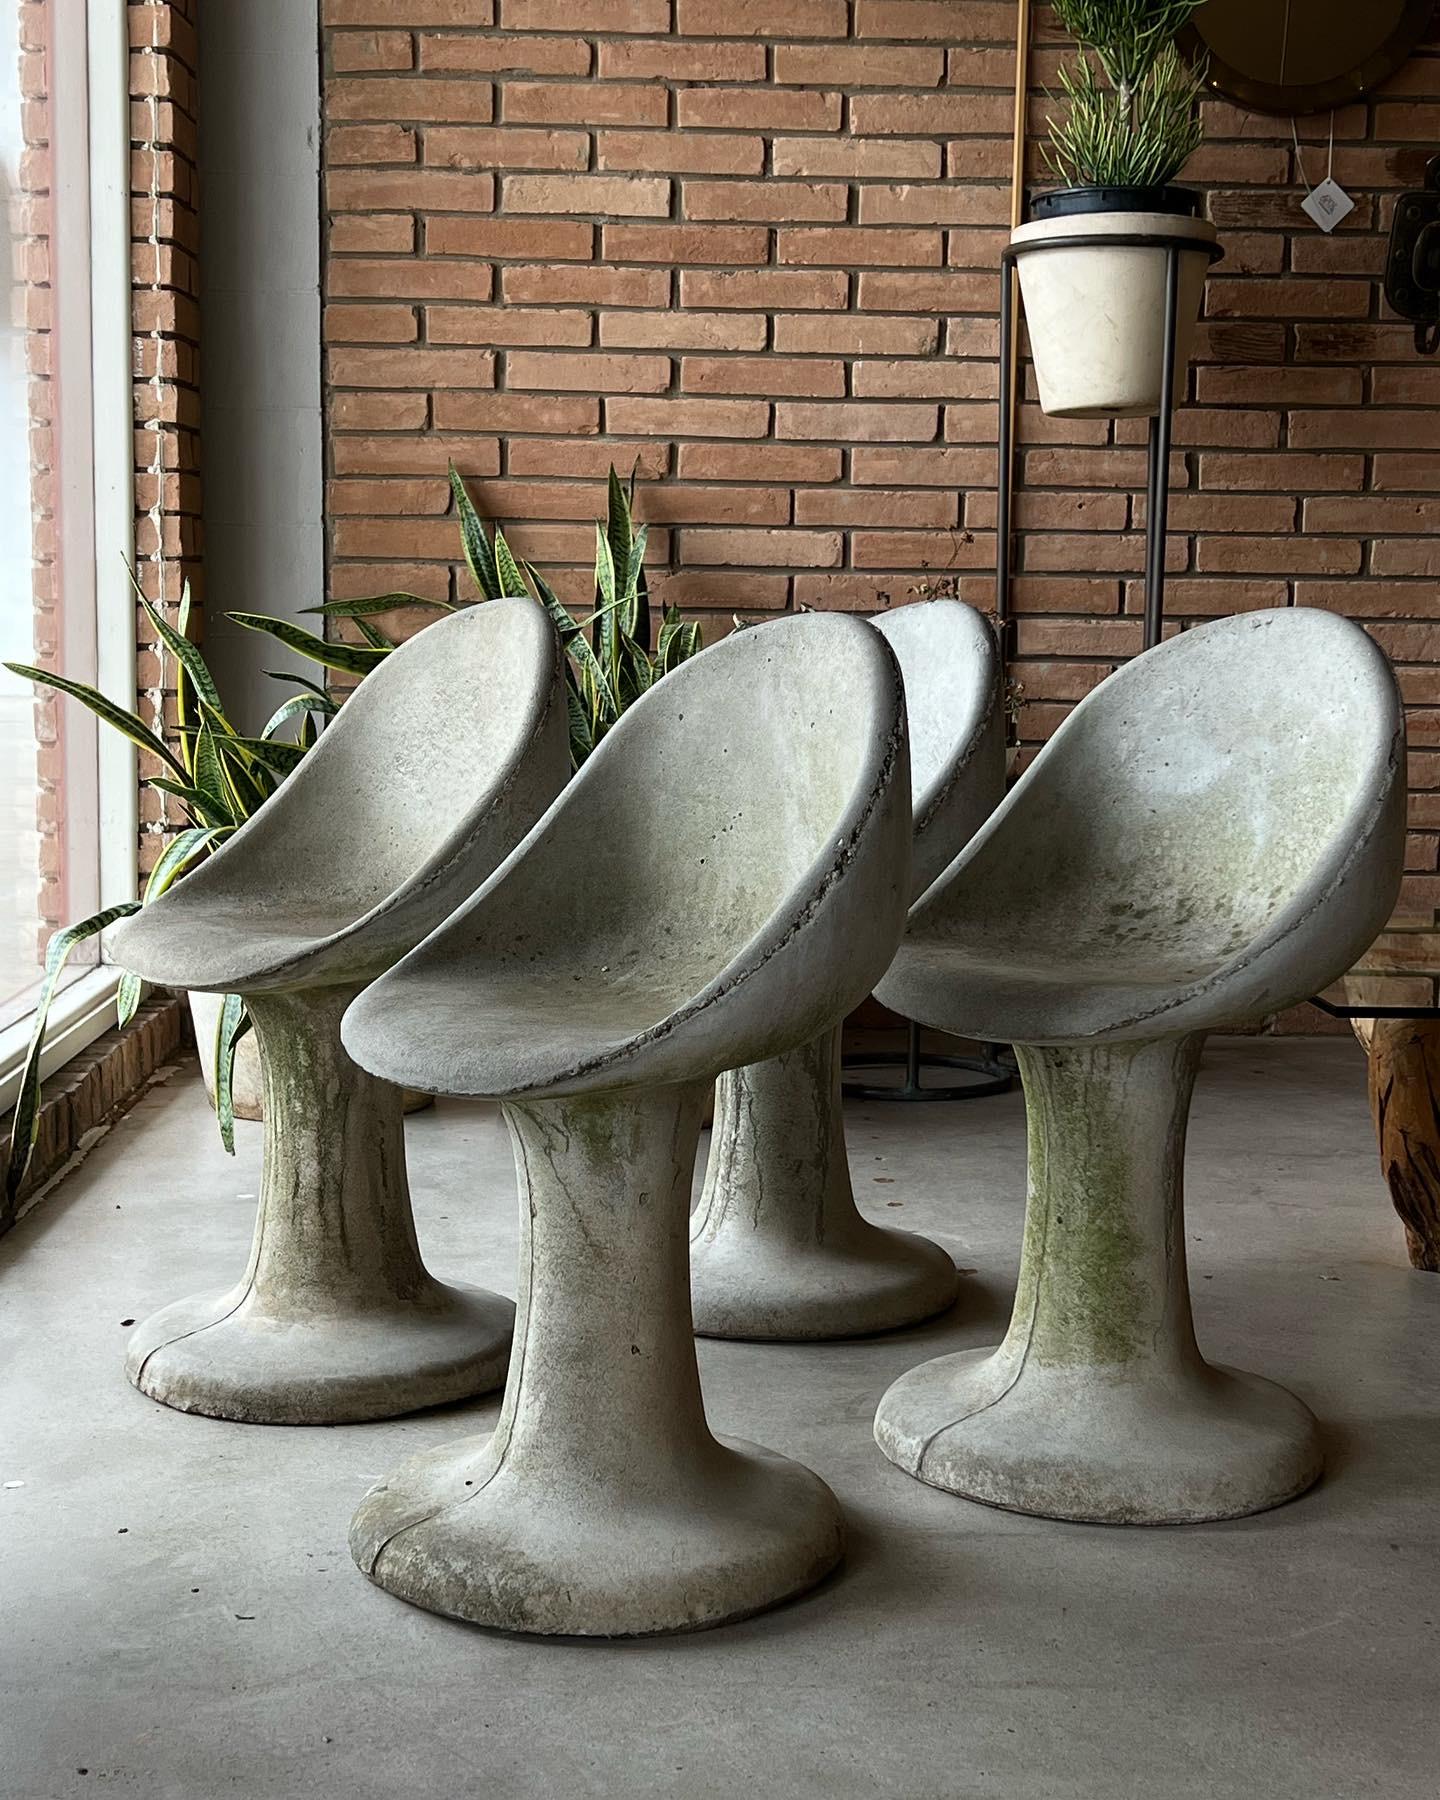 Unique set of concrete aggregate tulip chairs in the Extremely well made and heavy. These examples have a beautiful environmental patina and would be a lovely addition to any garden or patio. 

Would work in any mid-century, Contemporary,